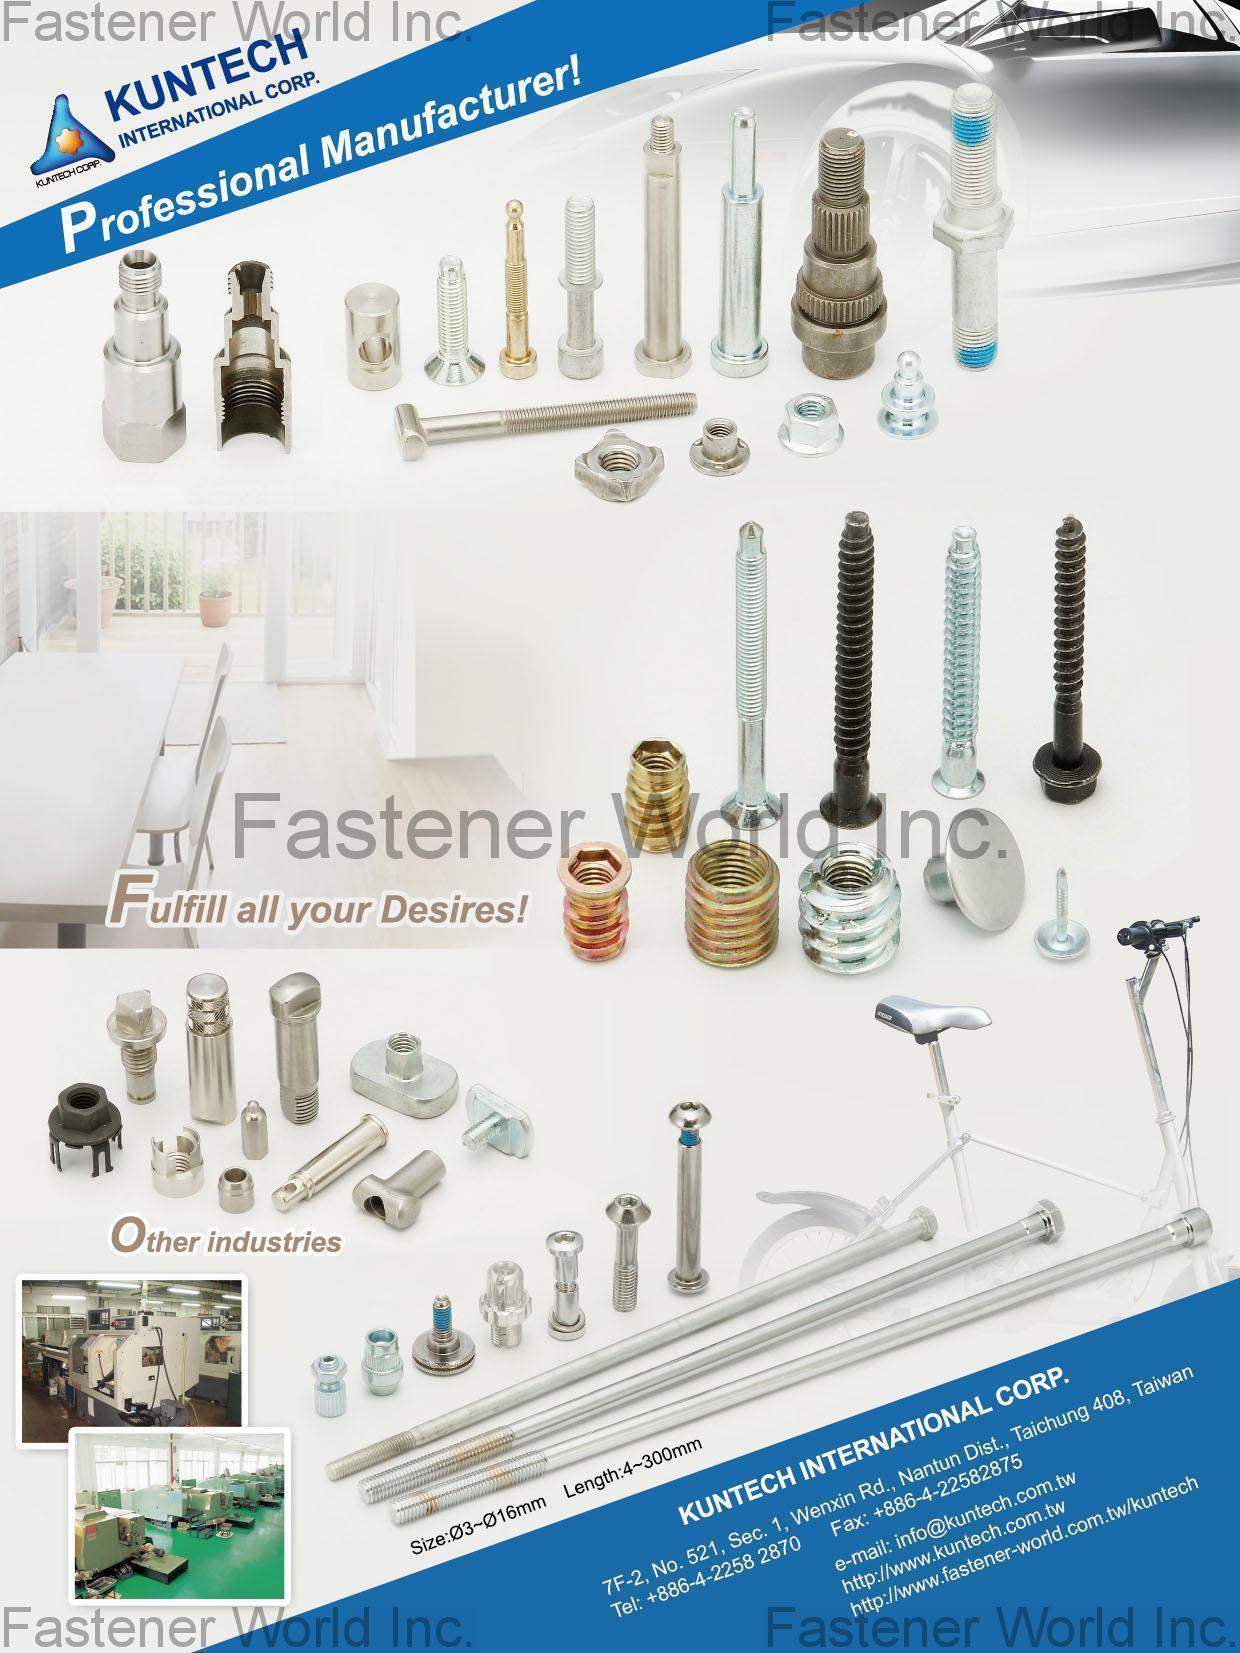 KUNTECH INTERNATIONAL CORP. , Standard, Customized Fasteners and Special Hardware, CNC Machining, Cold-Forming , Special Parts